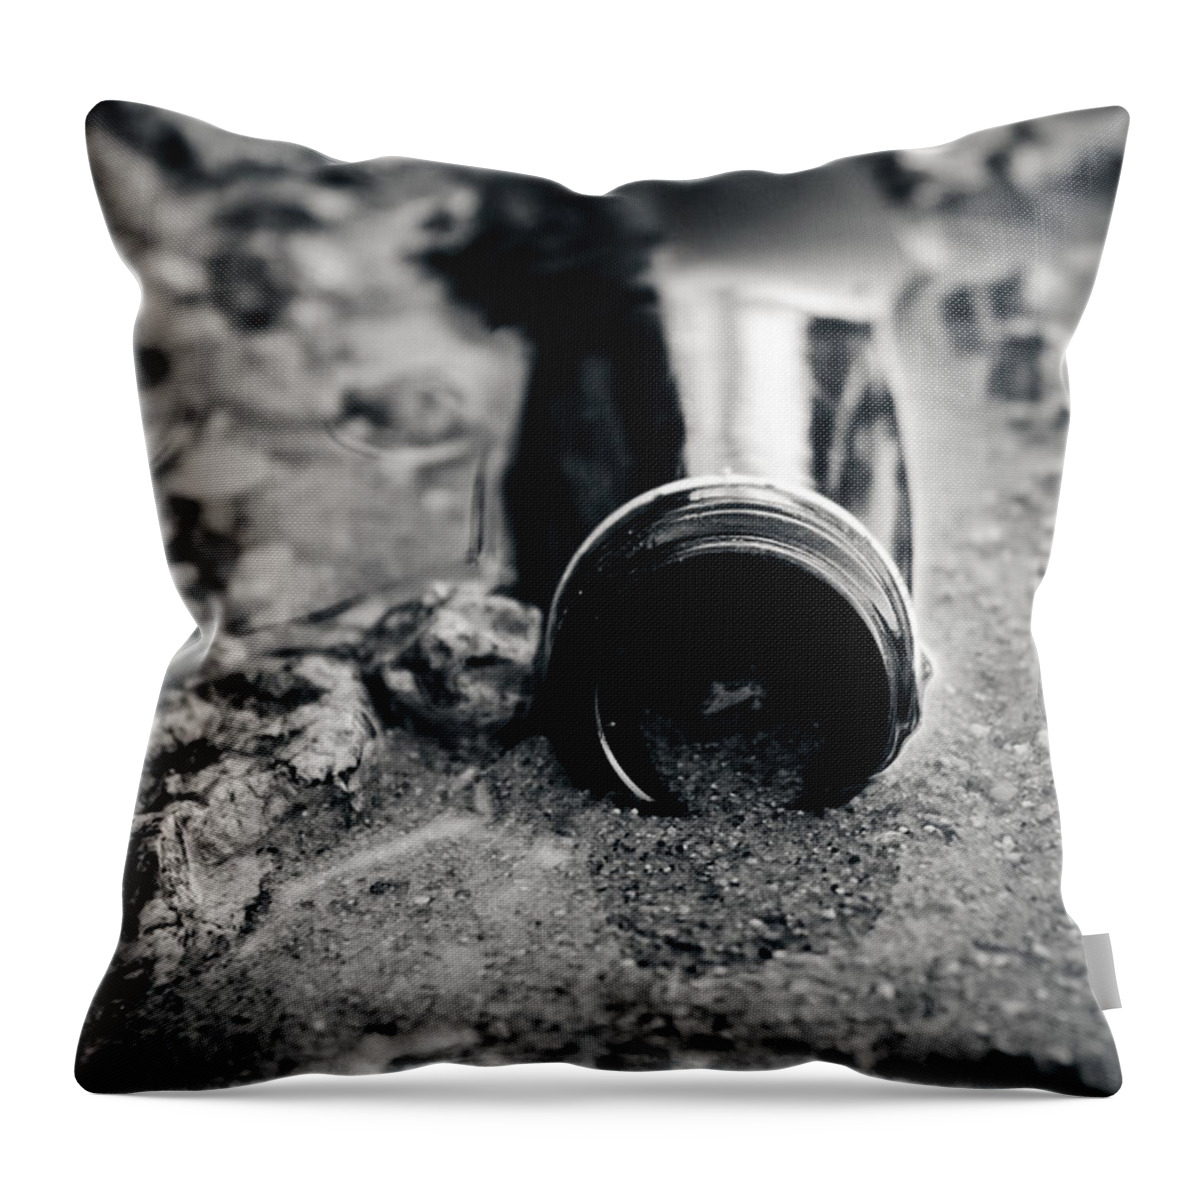 Broken Throw Pillow featuring the photograph Broken Promises by Jessica Brawley